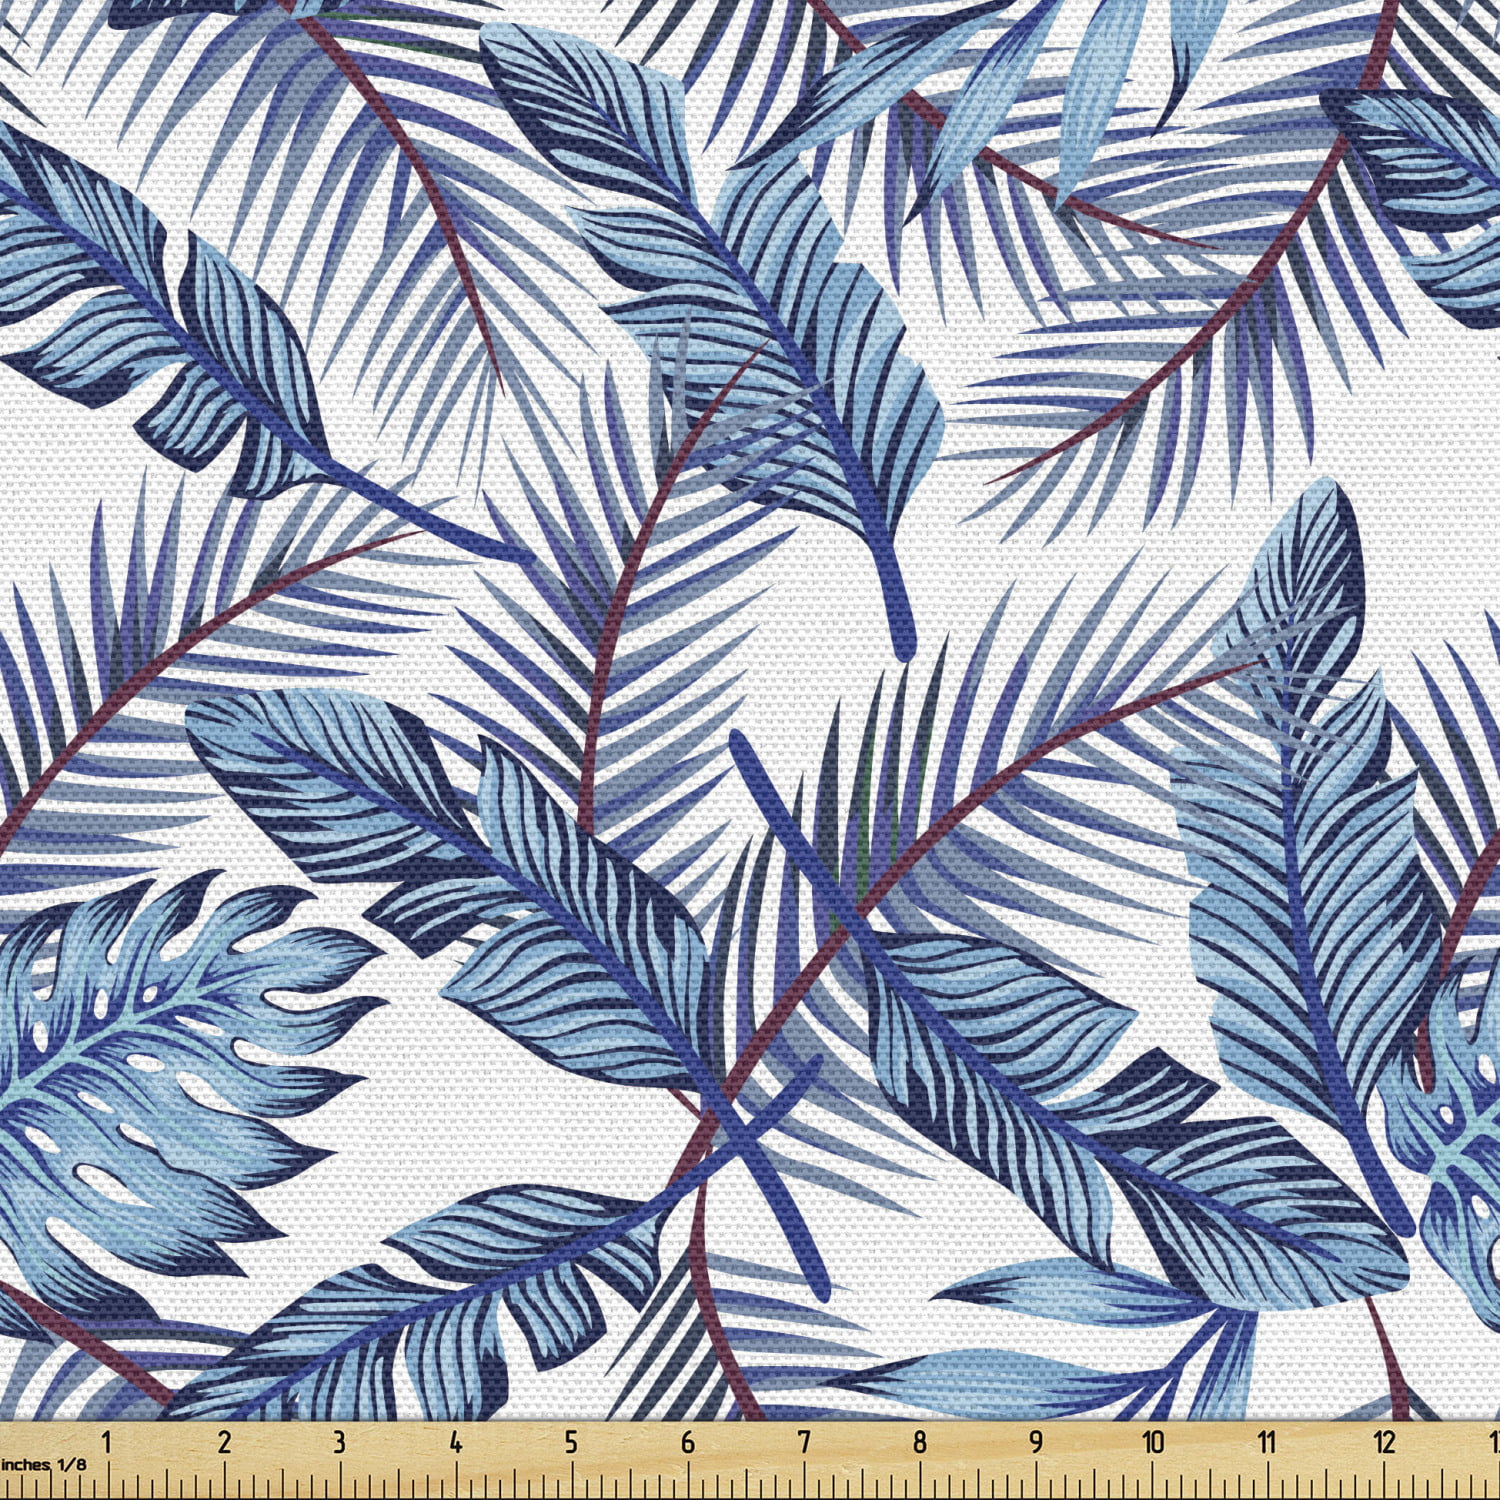 Botany Upholstery Fabric by the Yard, Repetitive Exotic Palm Leaves on  Plain Backdrop Art Print Illustration, Decorative Fabric for DIY and Home  Accents, White Blue Dark Fuchsia by Ambesonne